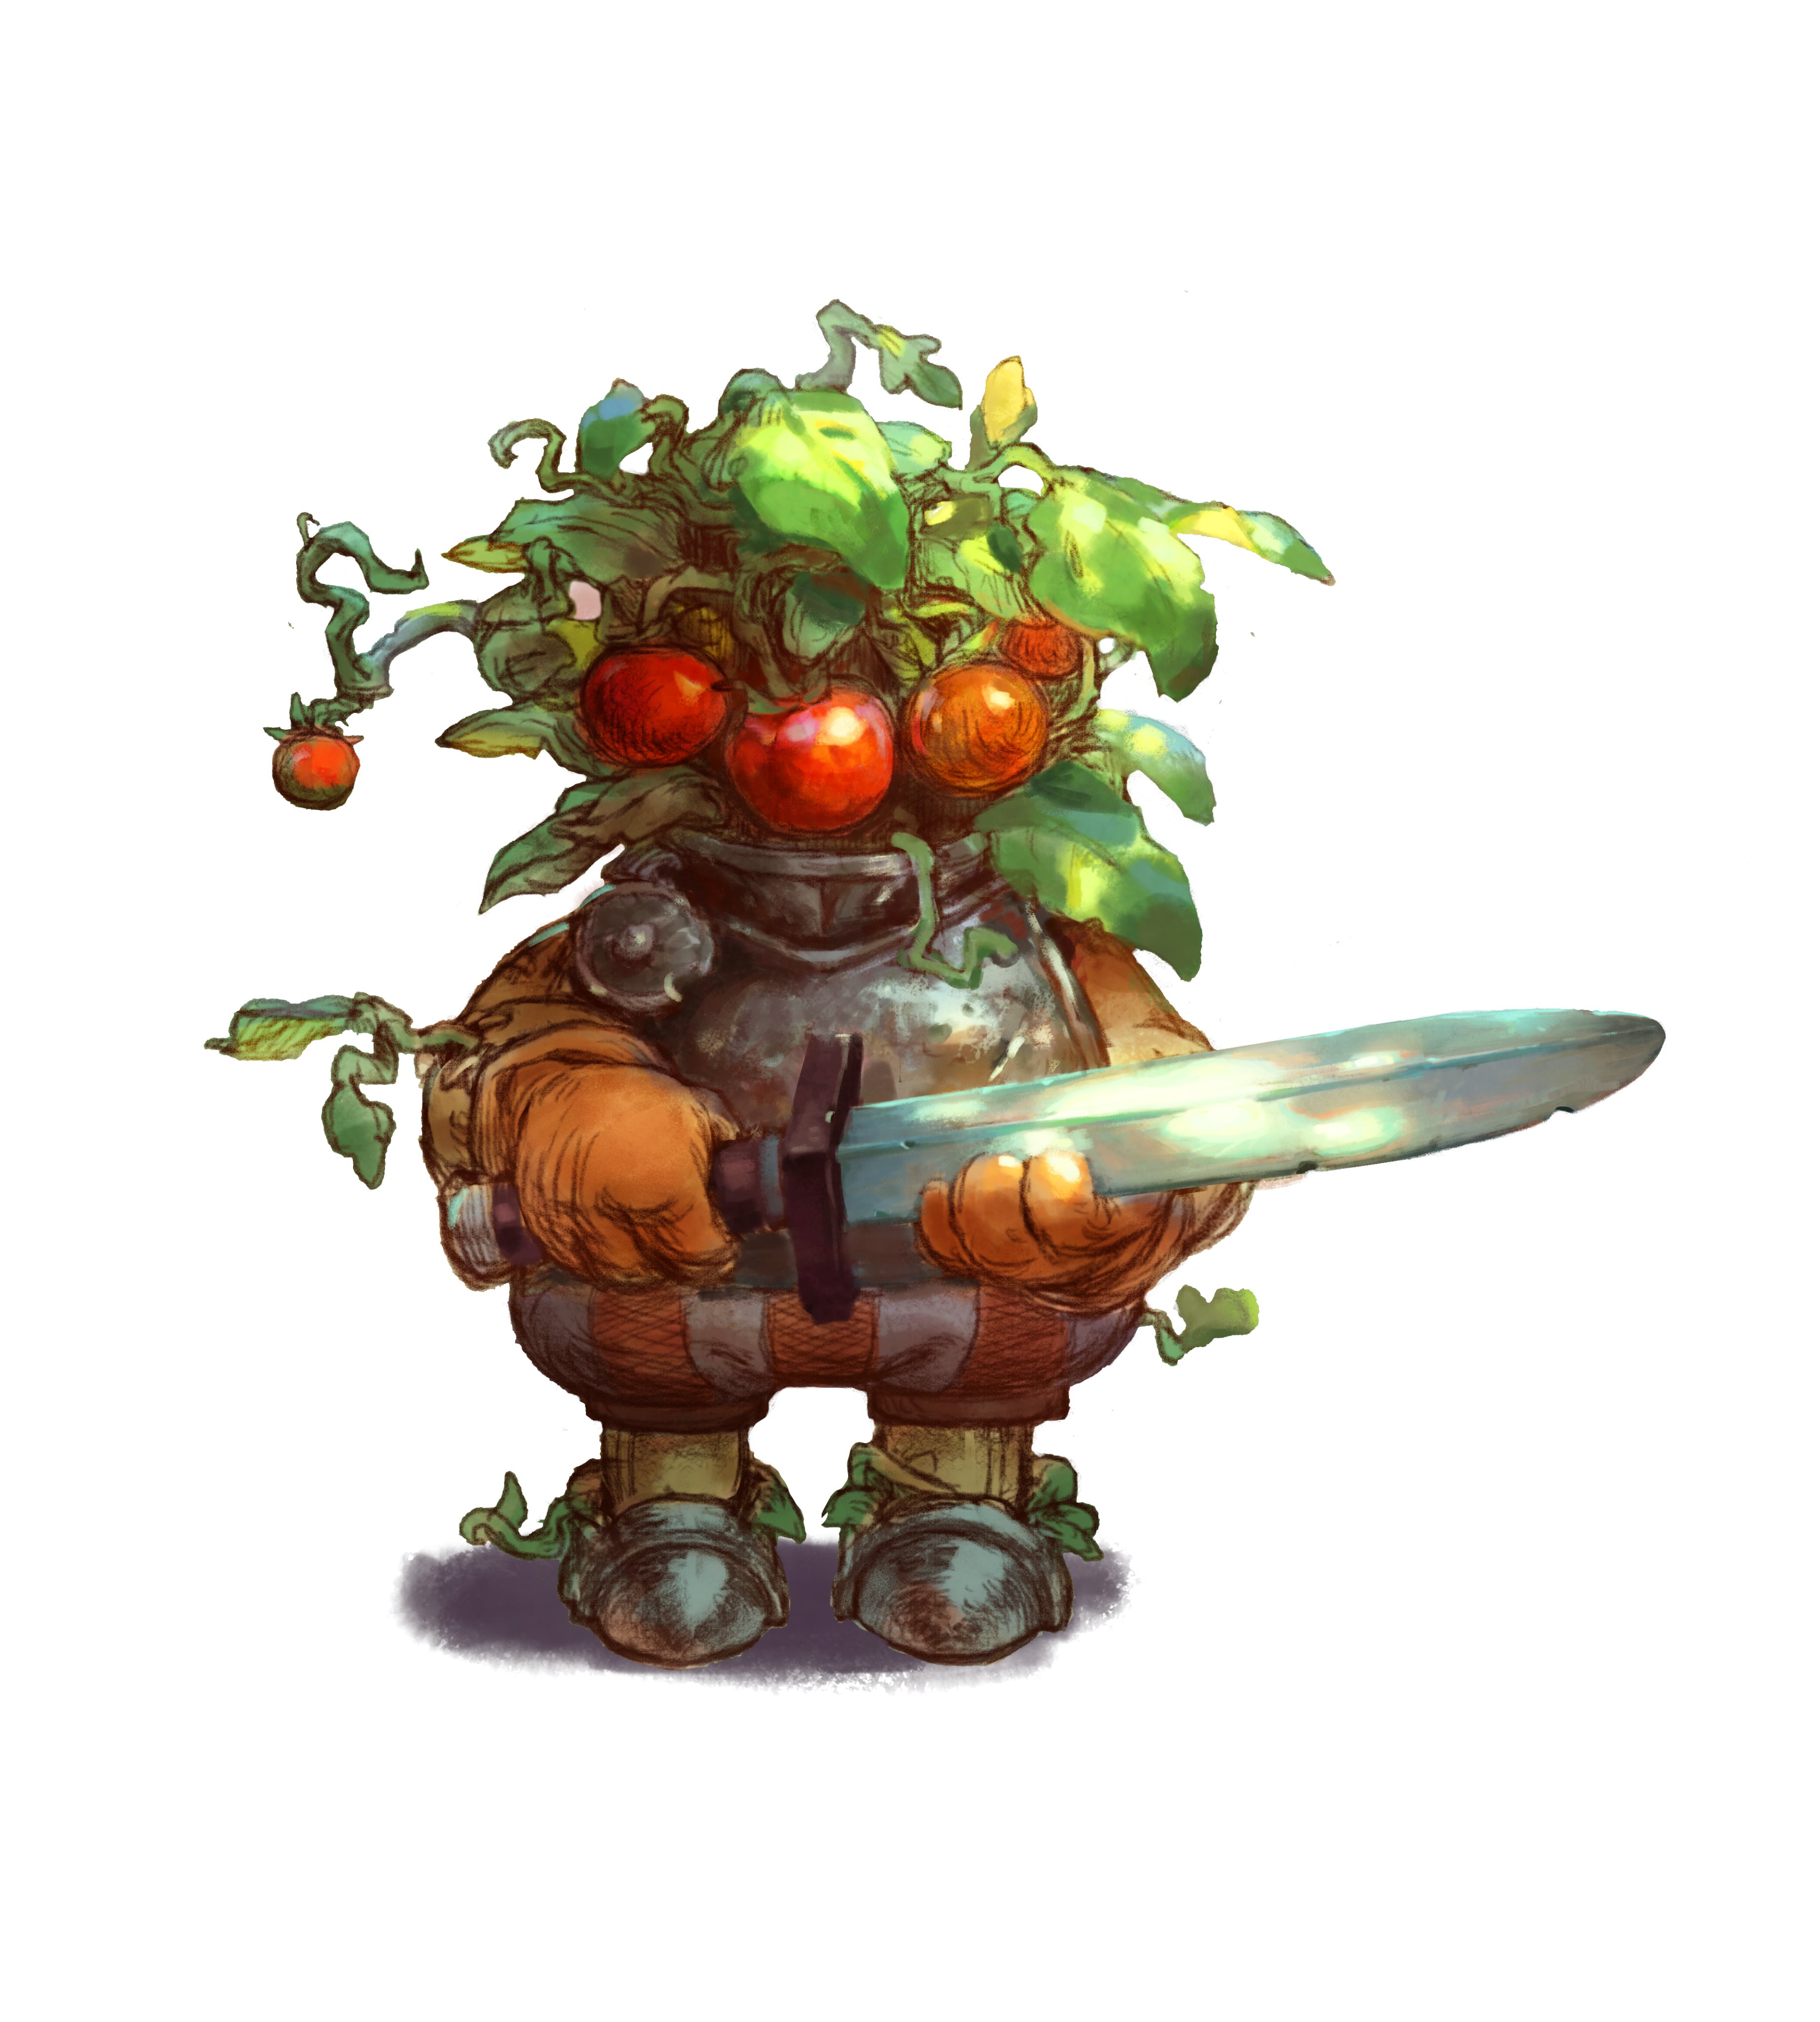 Tuan Doan Anh on Twitter: "Lil Tomato soldier #fantasy, #cute, #humor, #fun, #fat, #tomato, #sunlight, #sunny, #plant, # warrior, #soldier, #metal, #green, #red, #tomatoes, #sun https://t.co/cchlf6CX7u" / Twitter